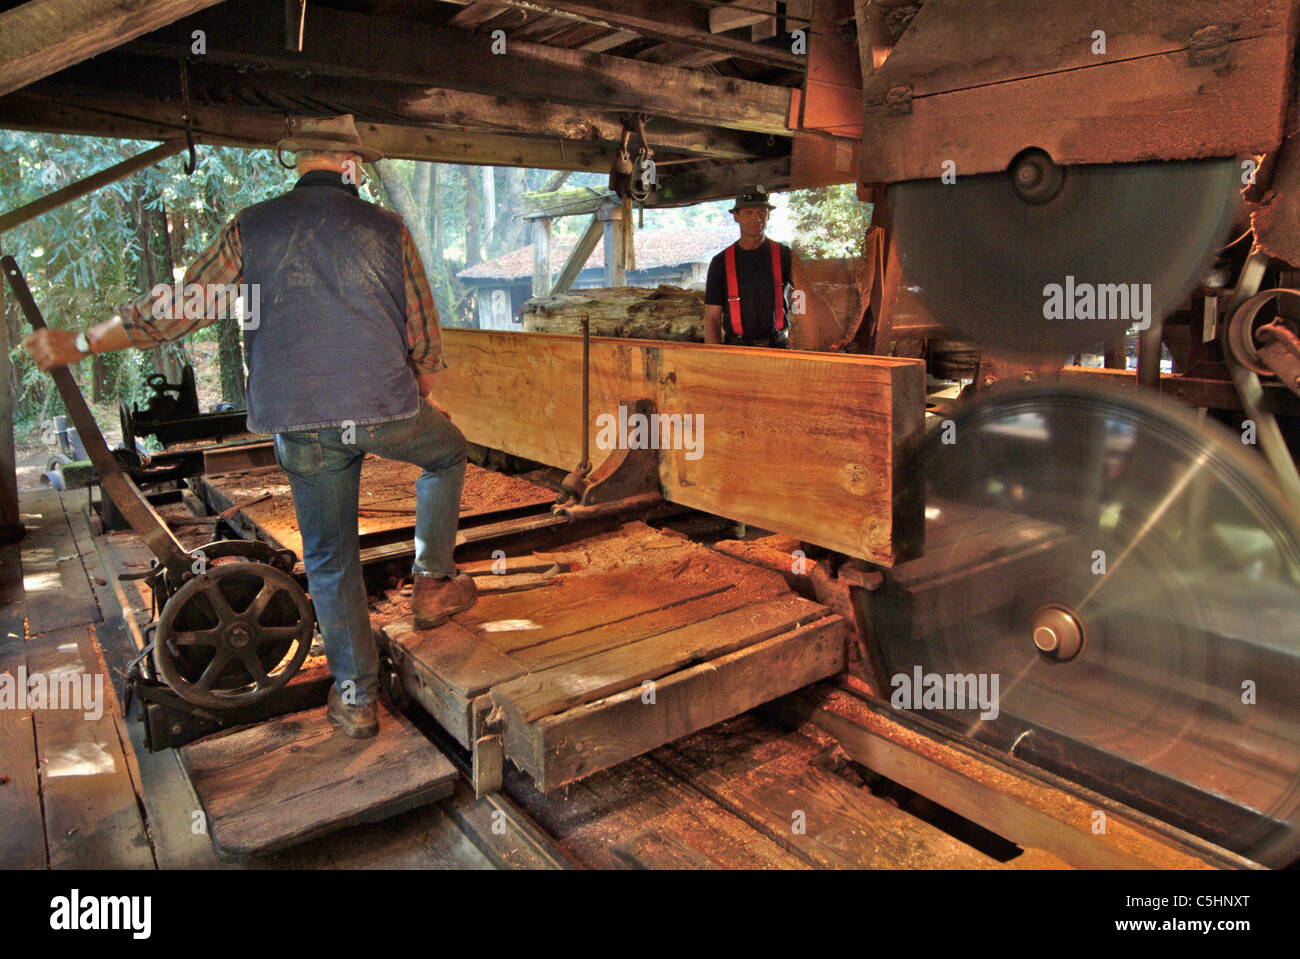 Saw mill worker are making the last cut on the trimmed redwood log at an antique saw mill in Occidental California Stock Photo